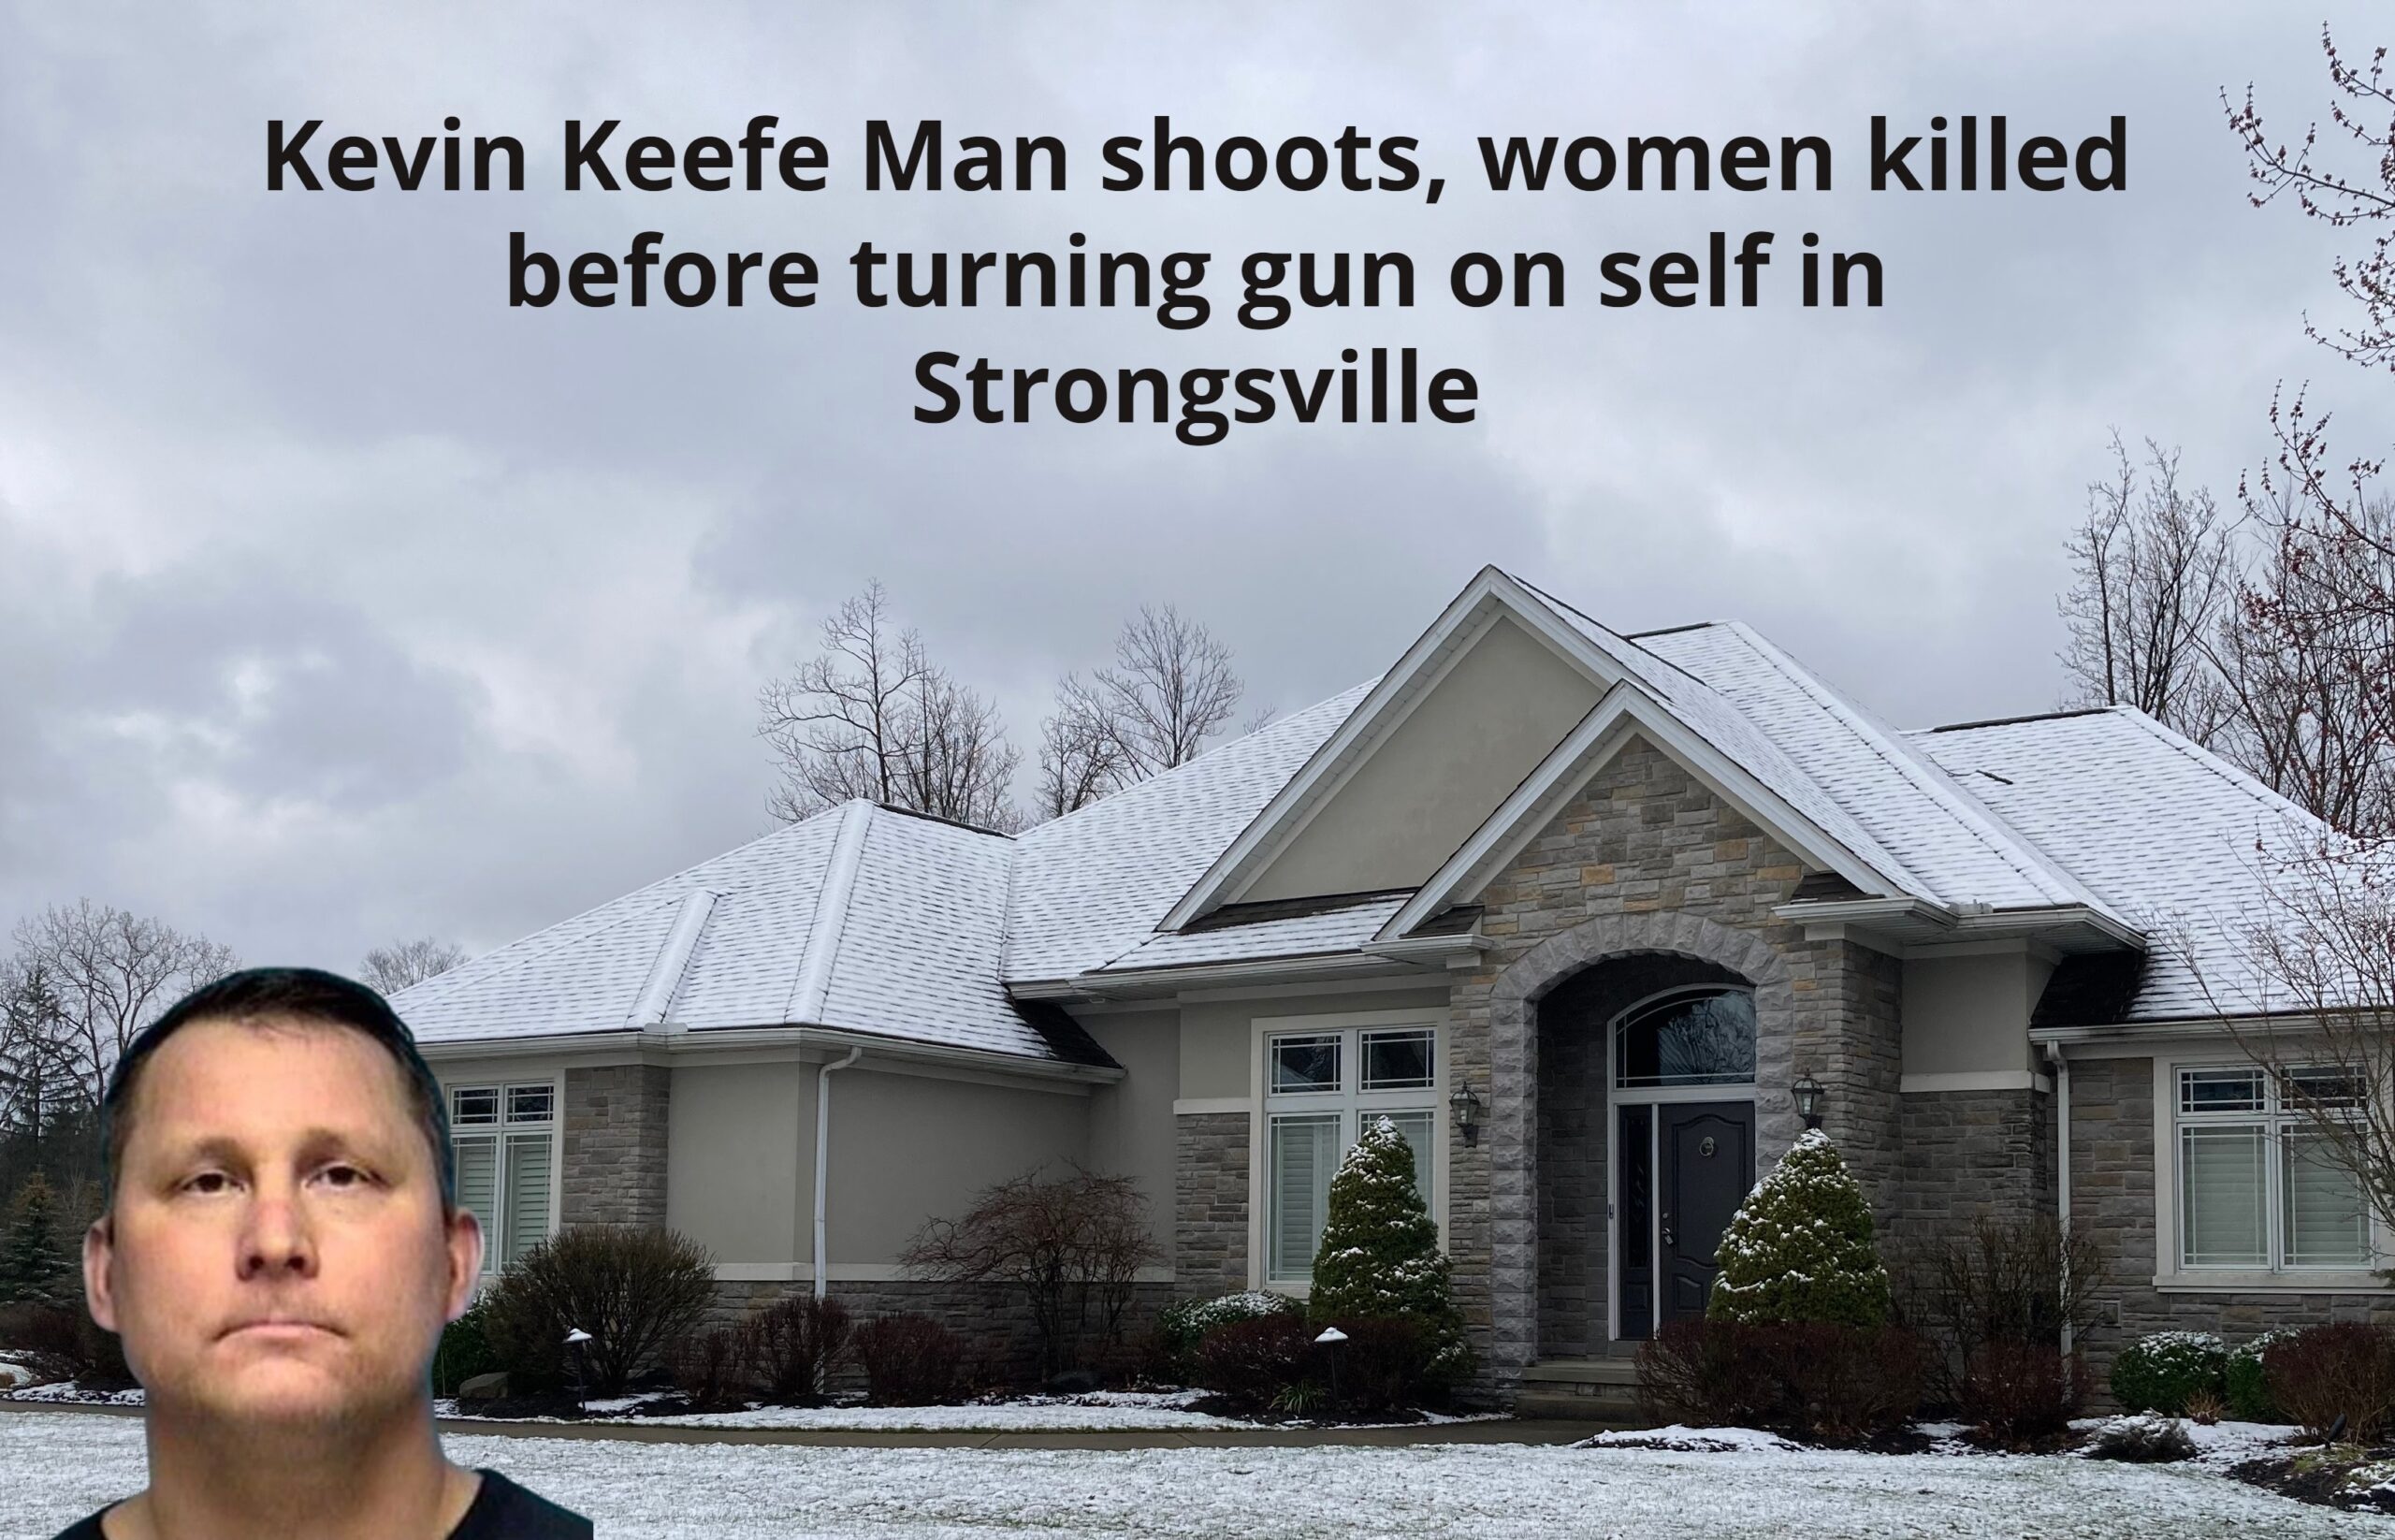 Kevin Keefe Man shoots, women killed before turning gun on self in Strongsville